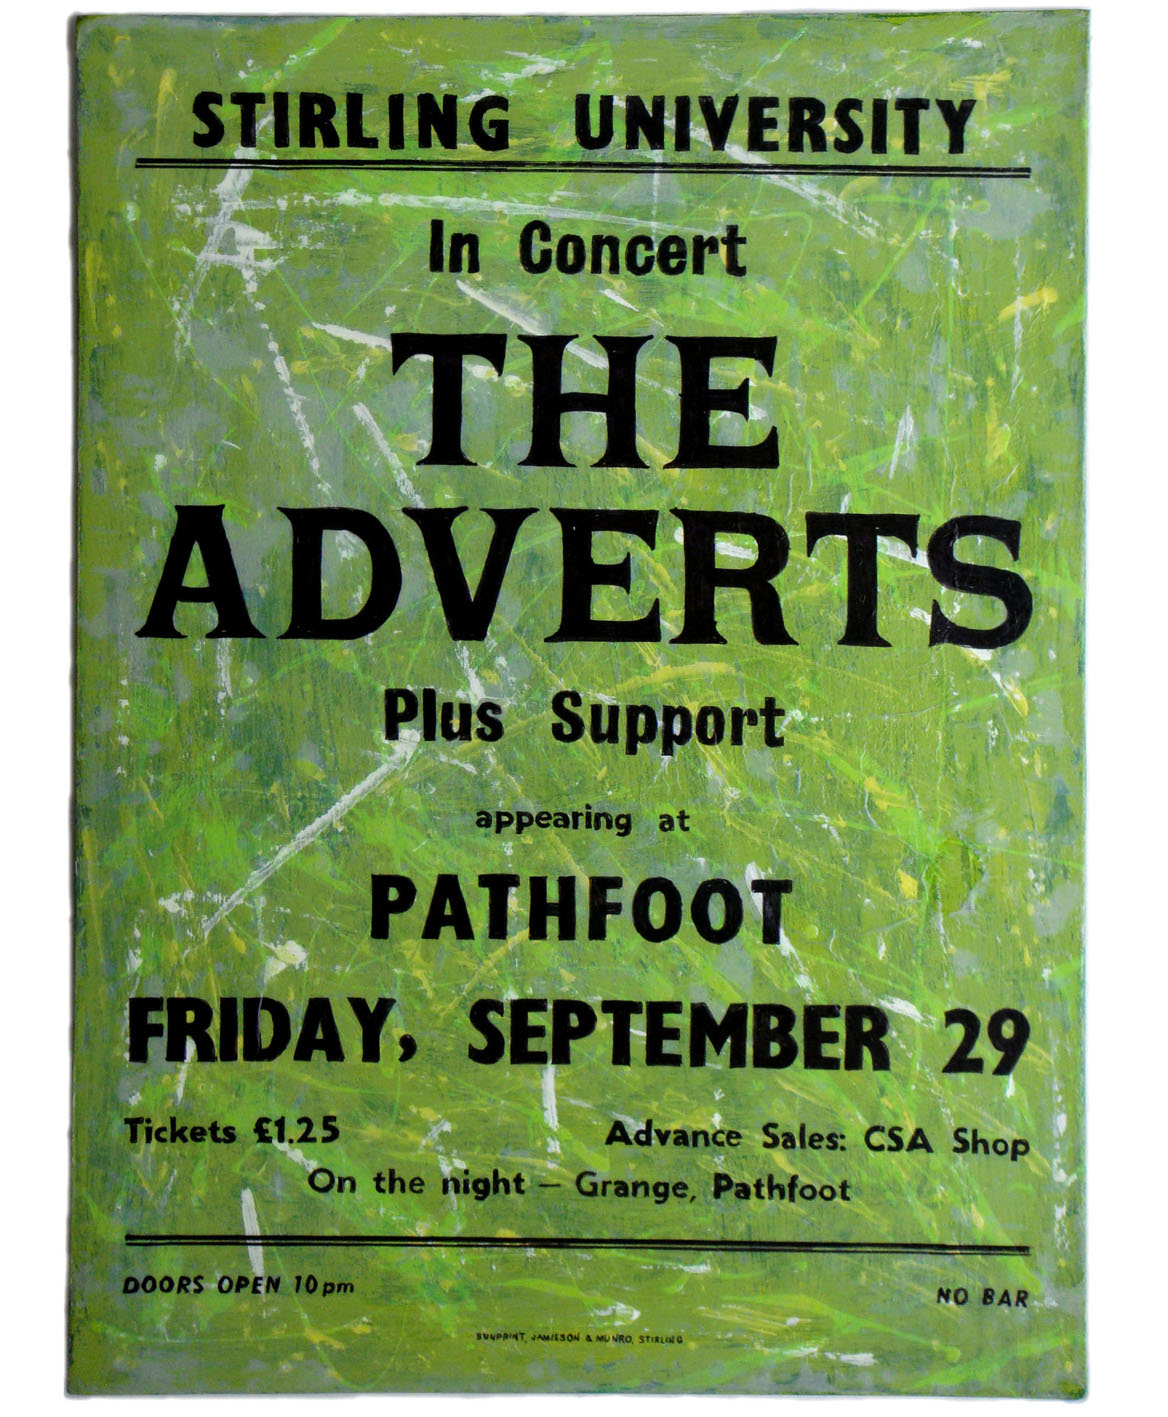 The Adverts<br>Stirling University
<br>Mixed media on plywood<br>38 x 51cm